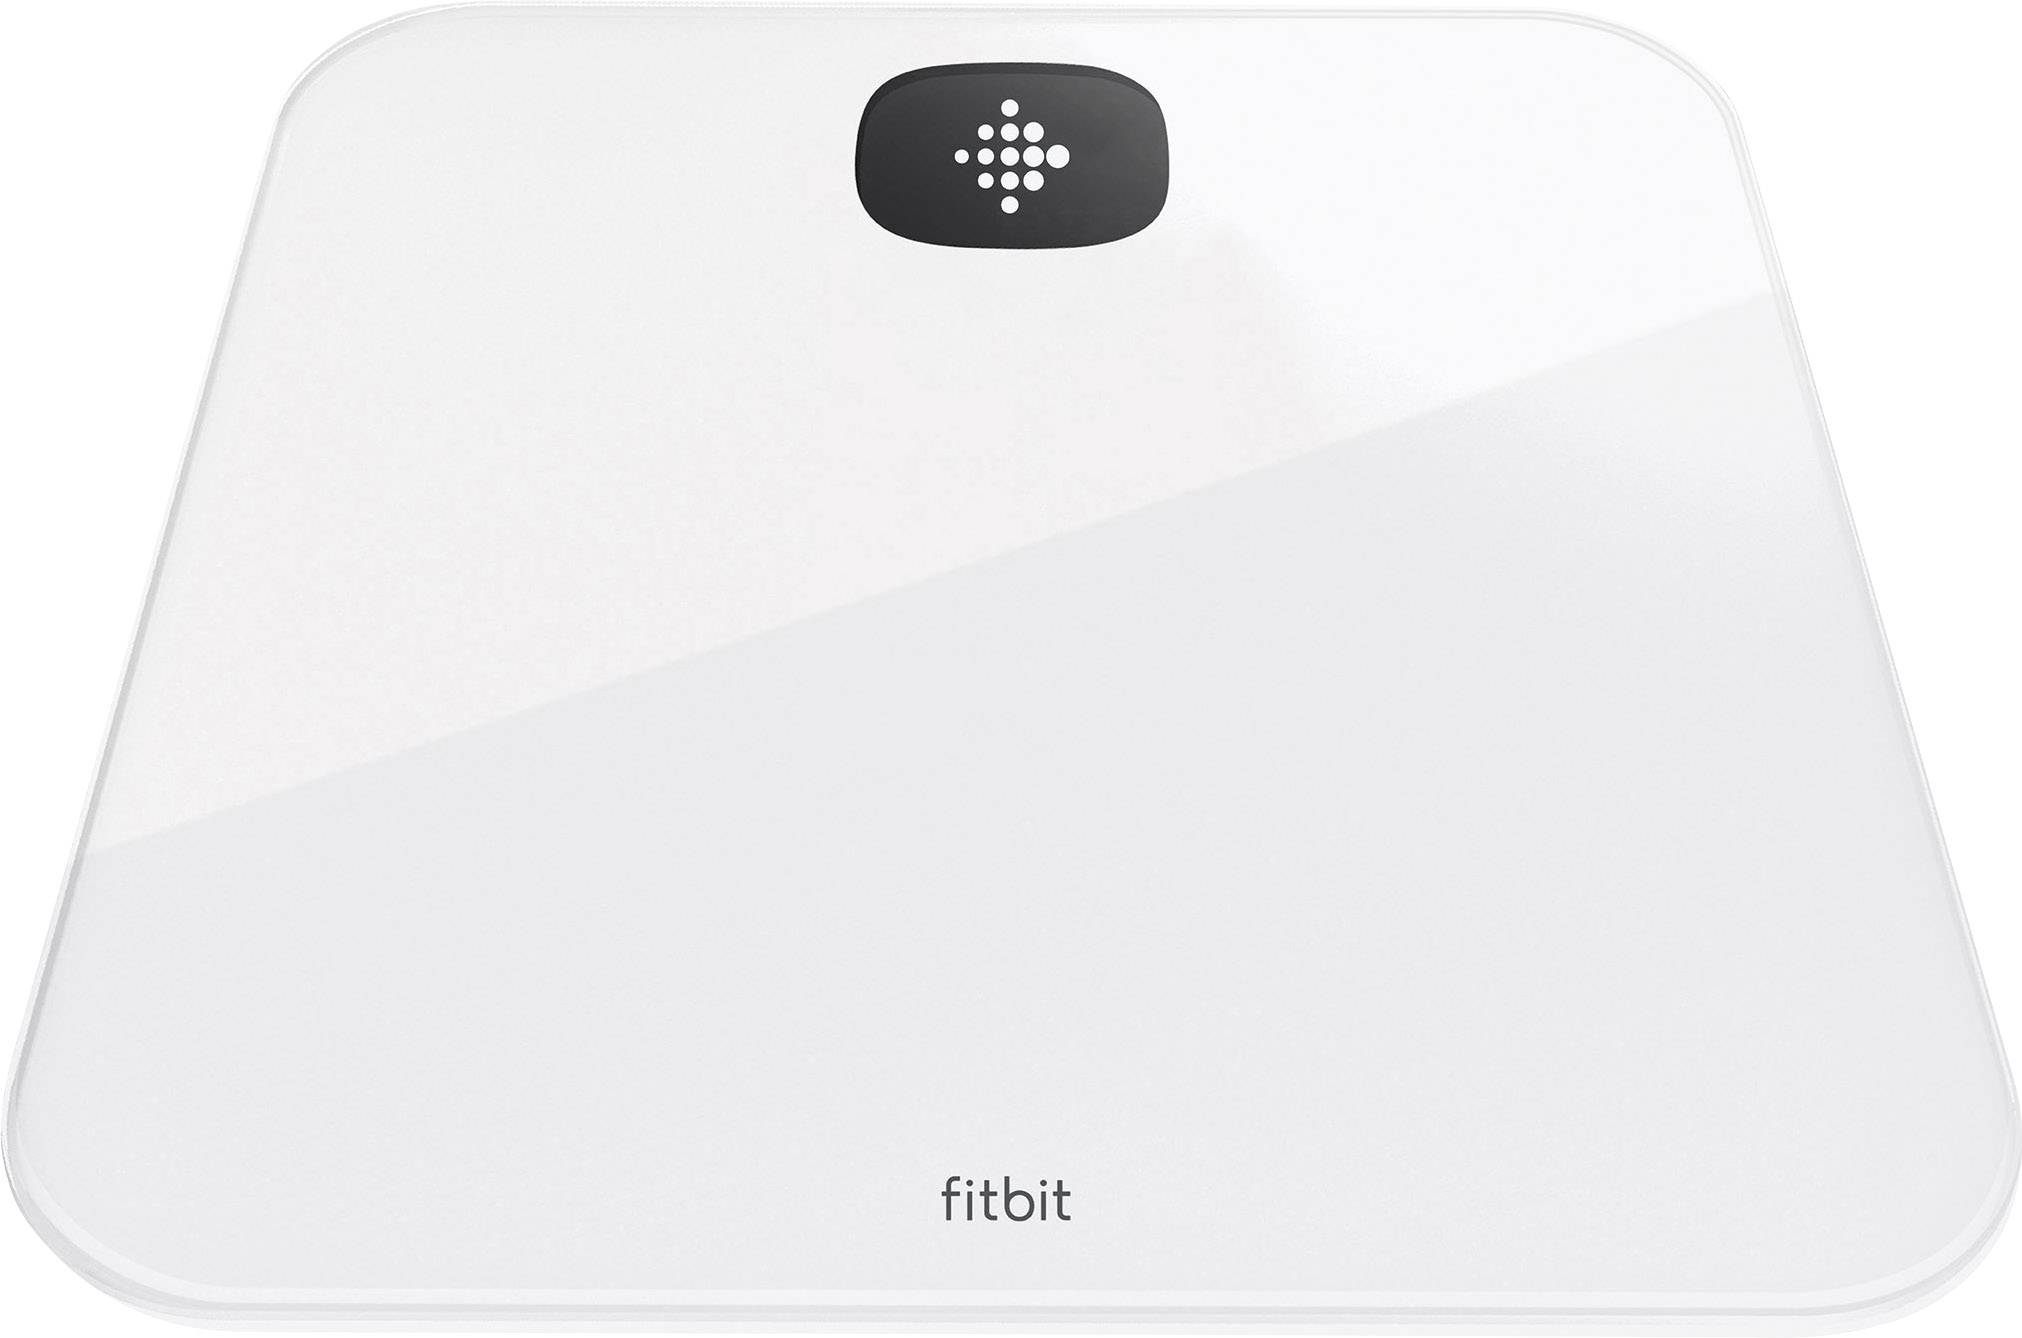 fitbit weight